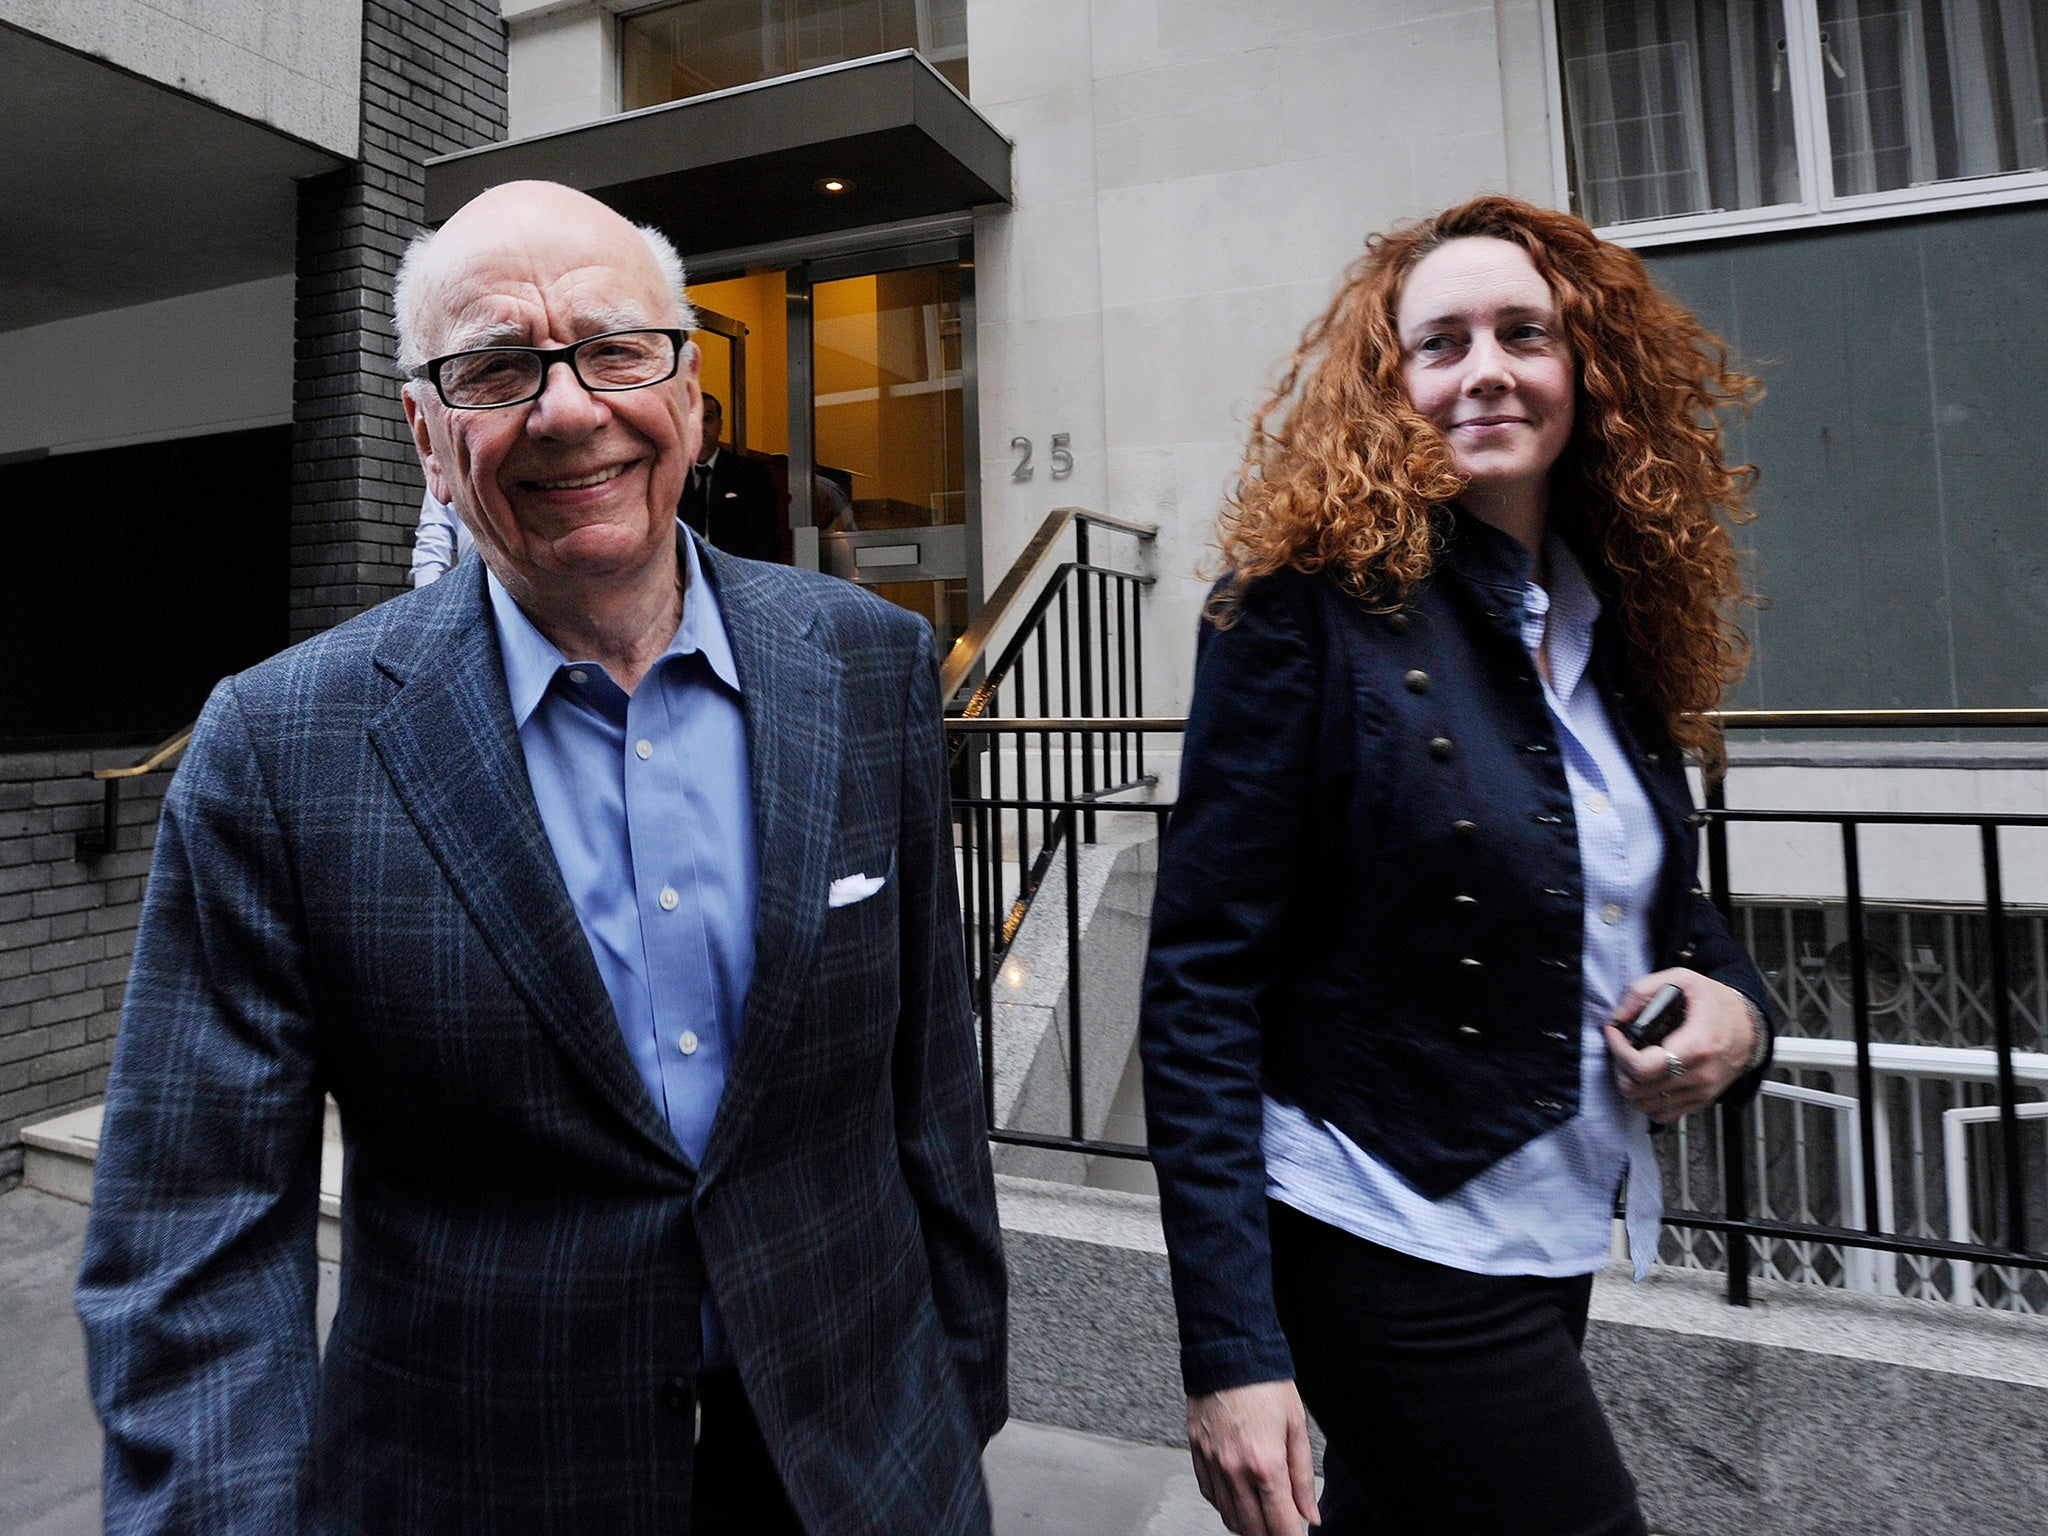 Rupert Murdoch with Rebekah Brooks, the former chief executive of News International, who was cleared of conspiring to hack phones